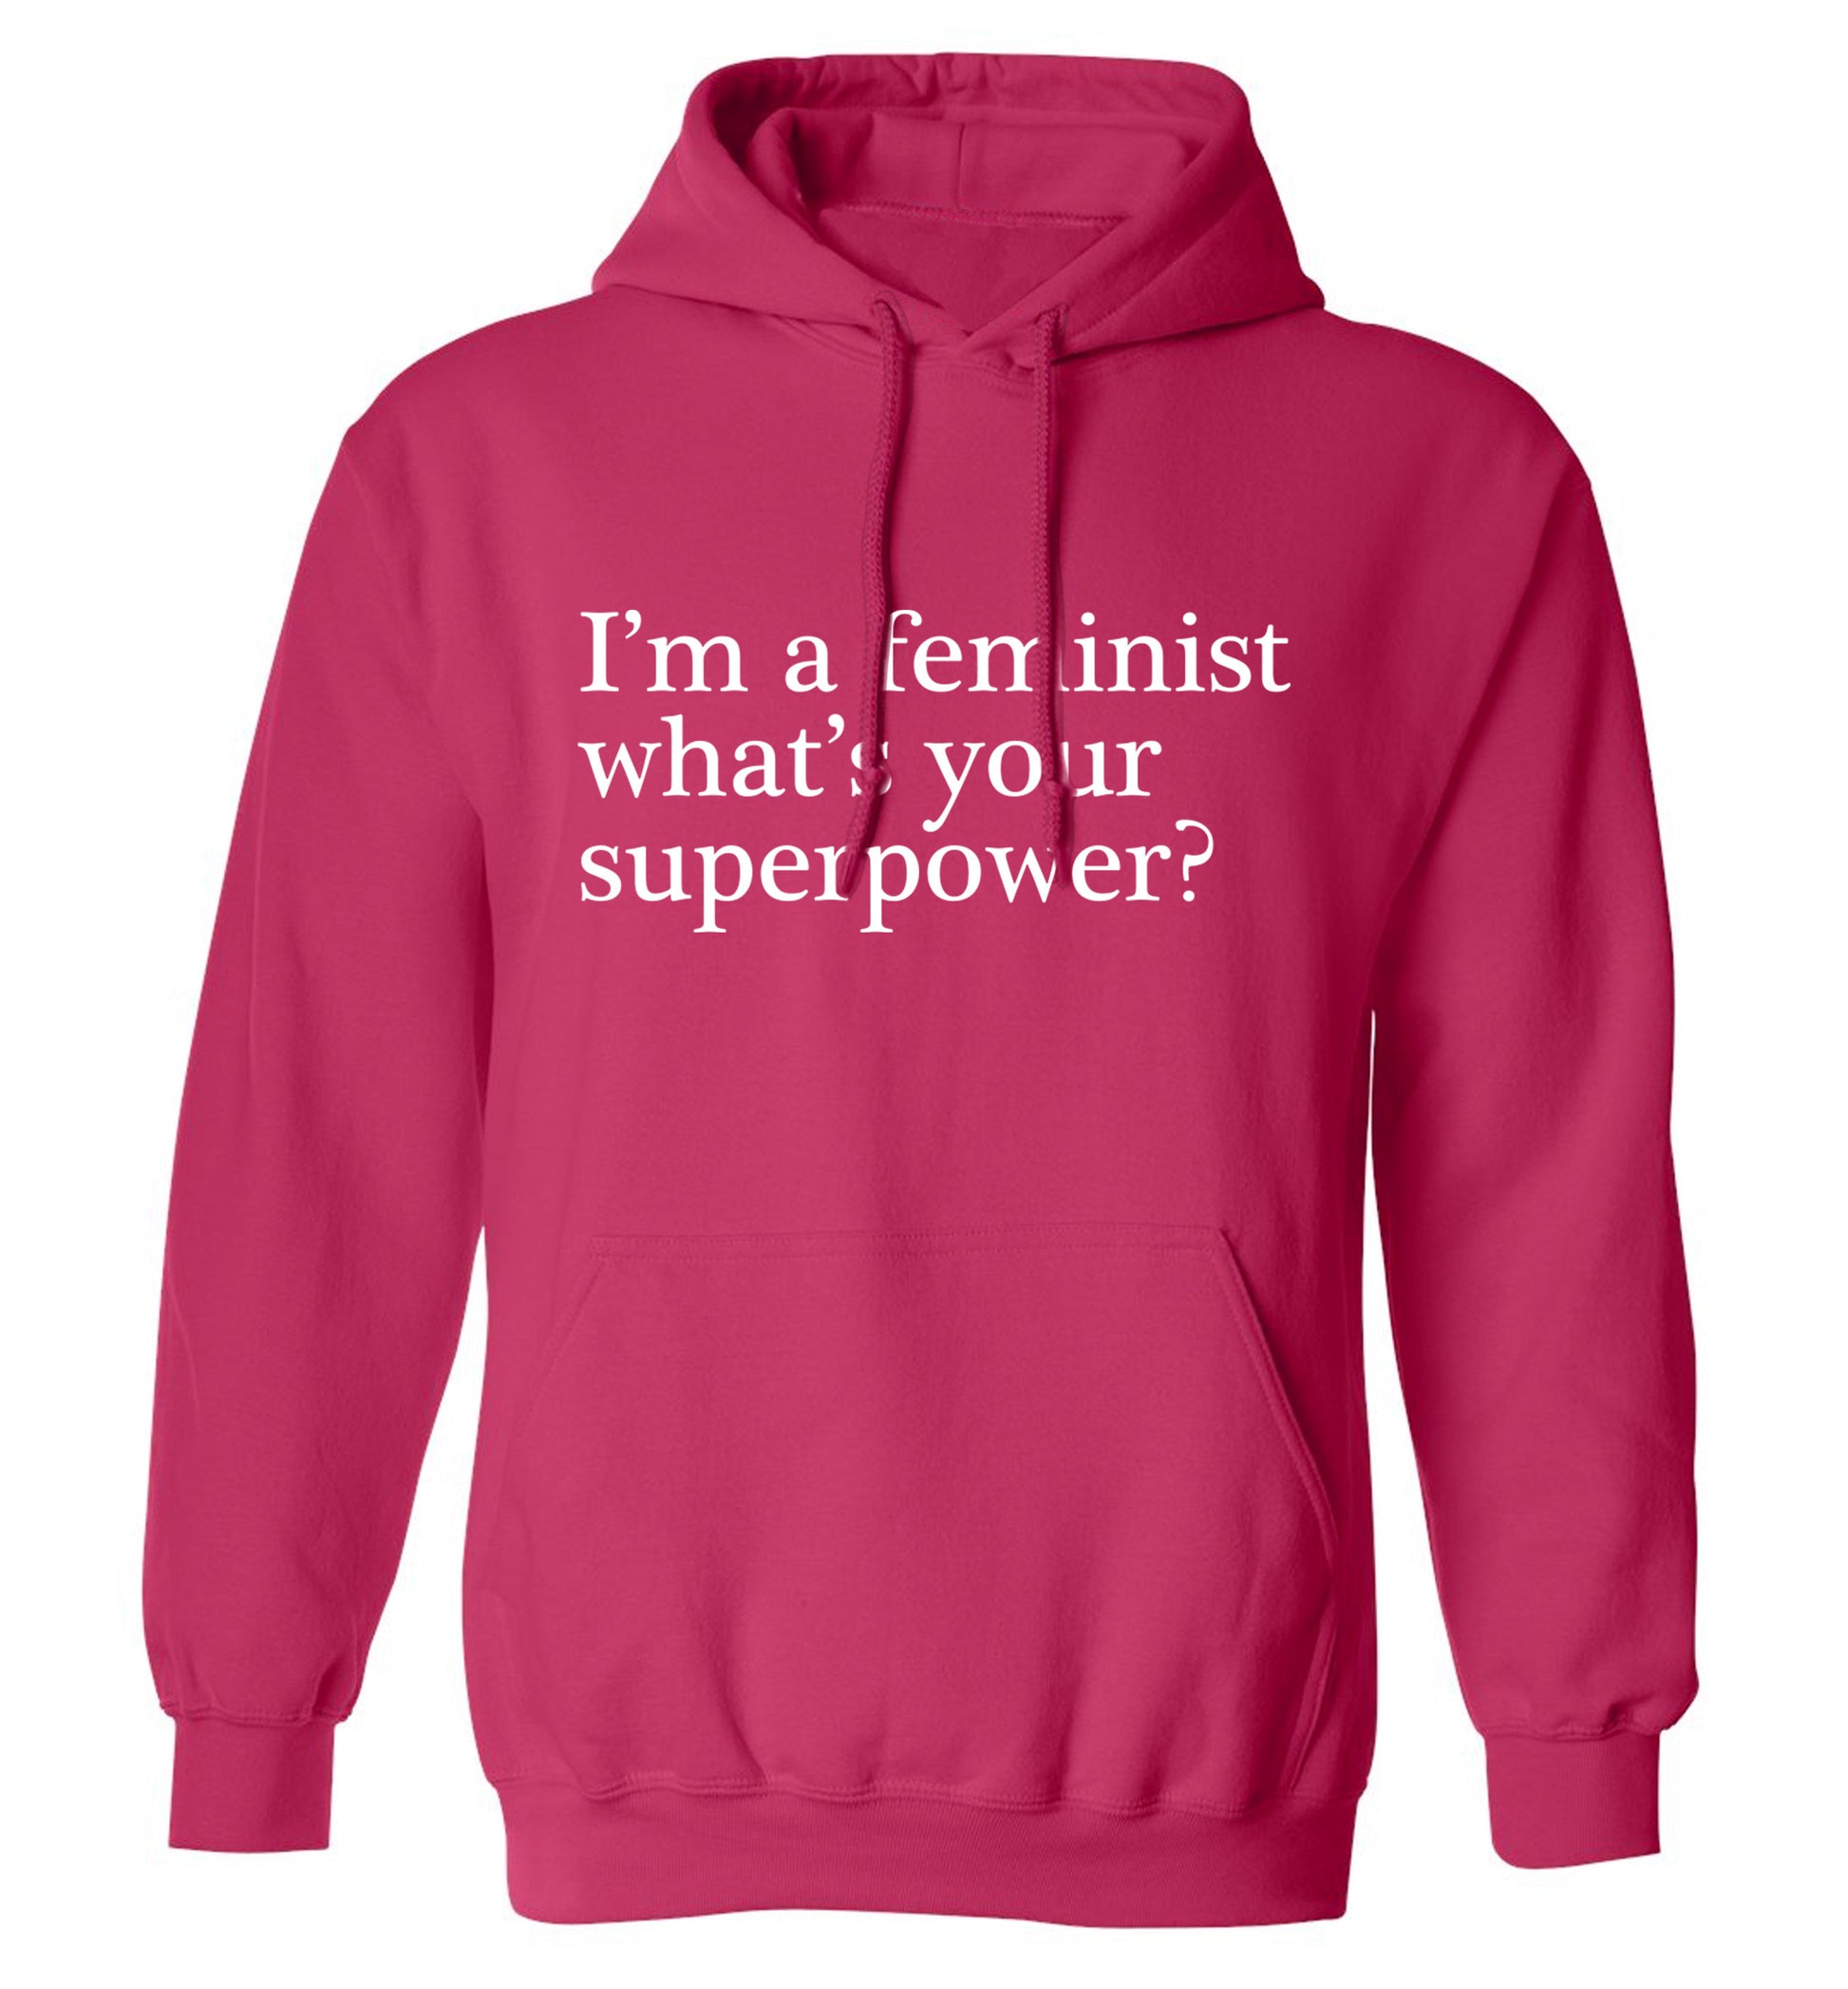 I'm a feminist what's your superpower? adults unisex pink hoodie 2XL